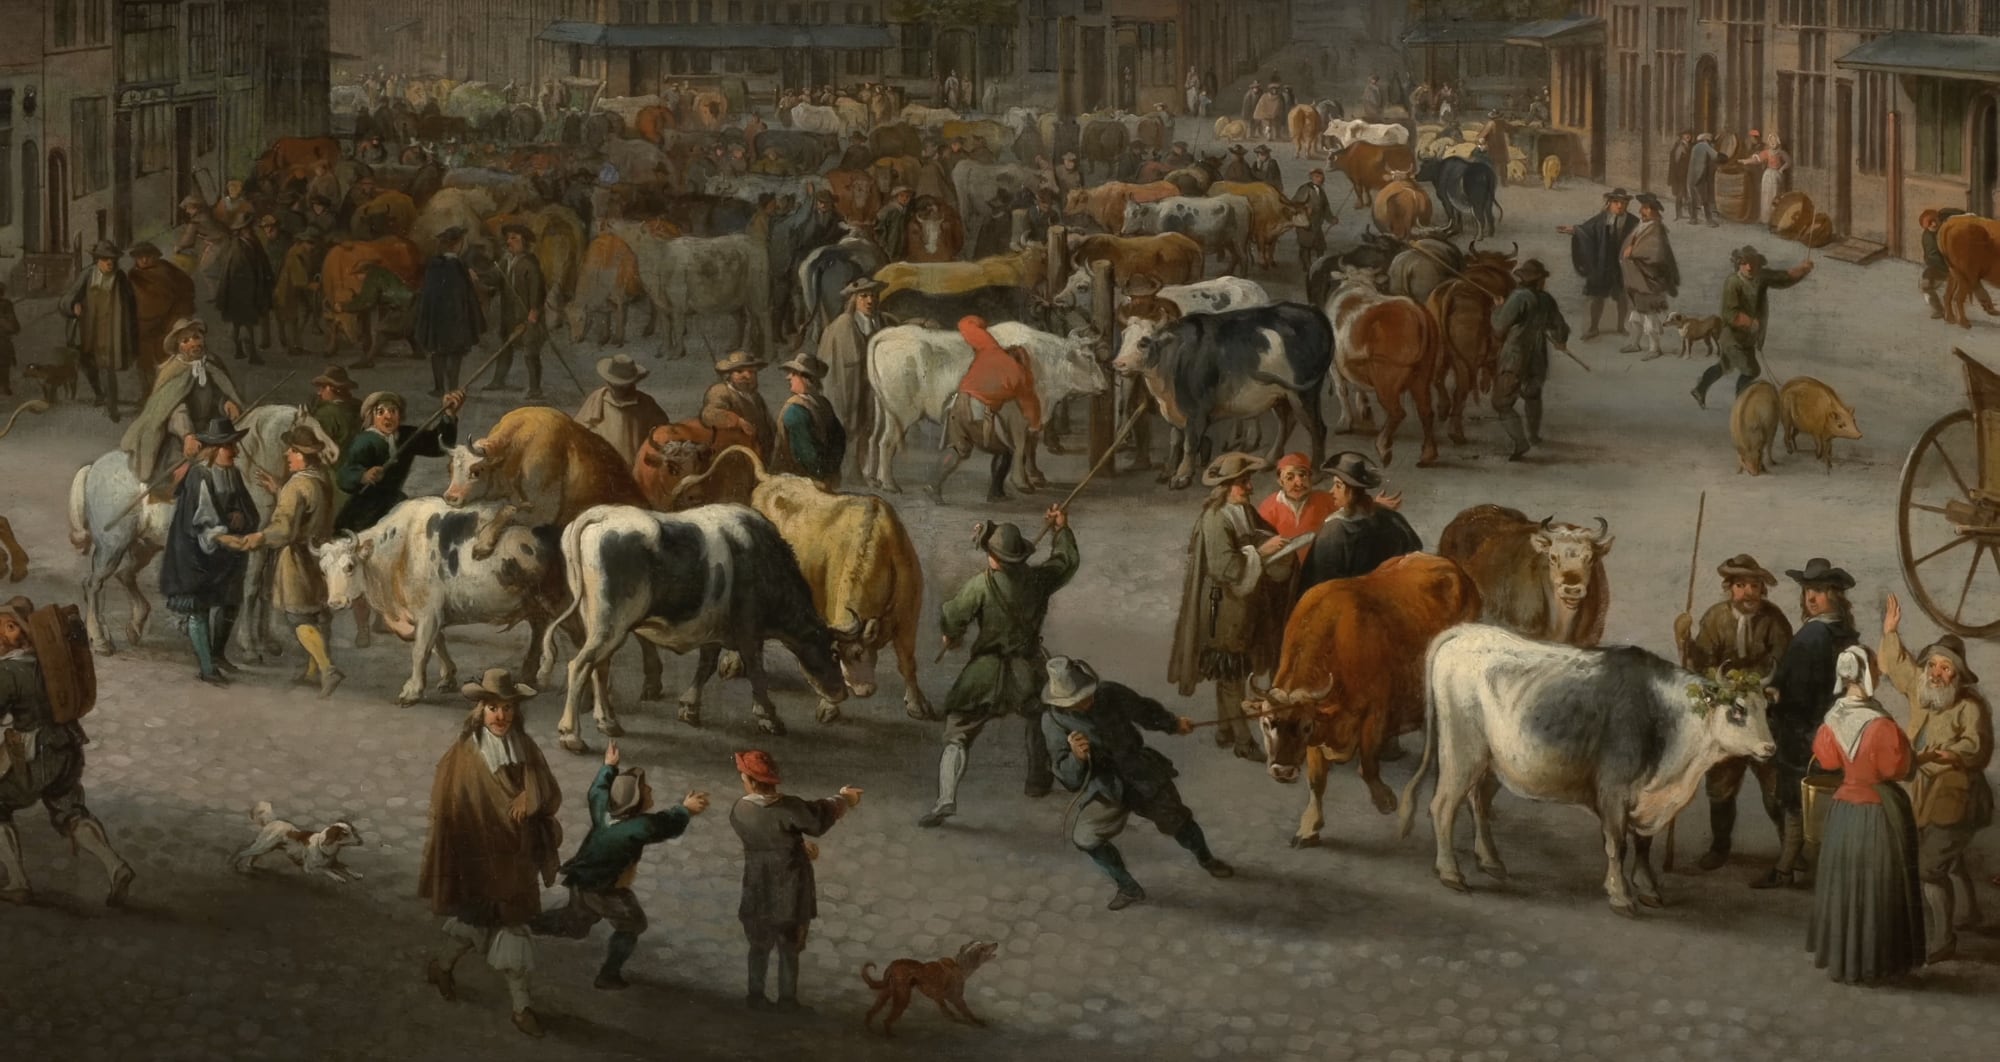 A painting of a town square with livestock and people